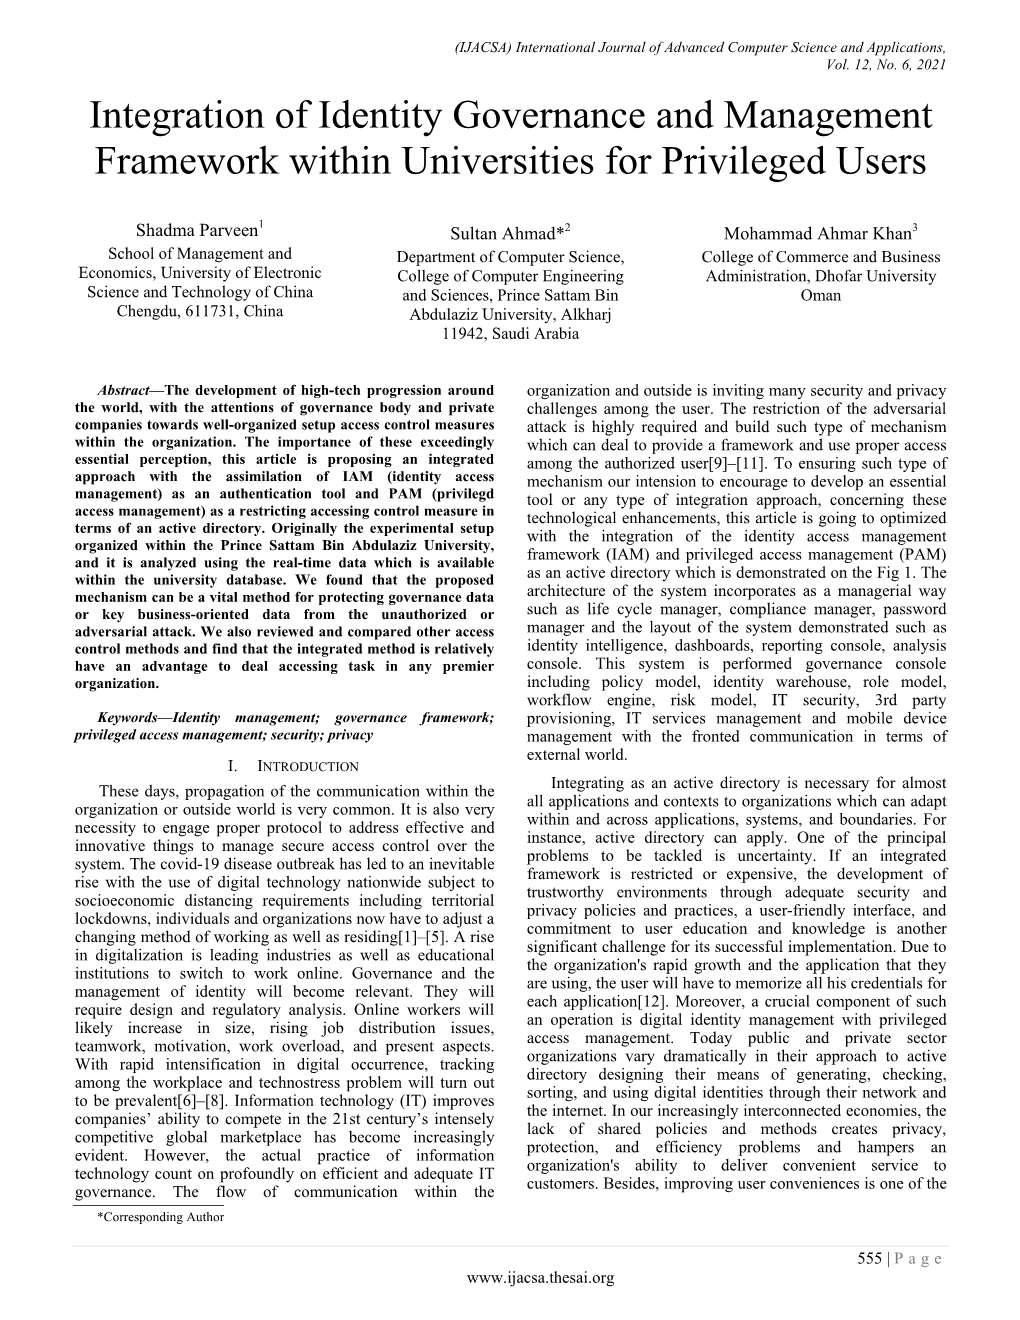 Integration of Identity Governance and Management Framework Within Universities for Privileged Users